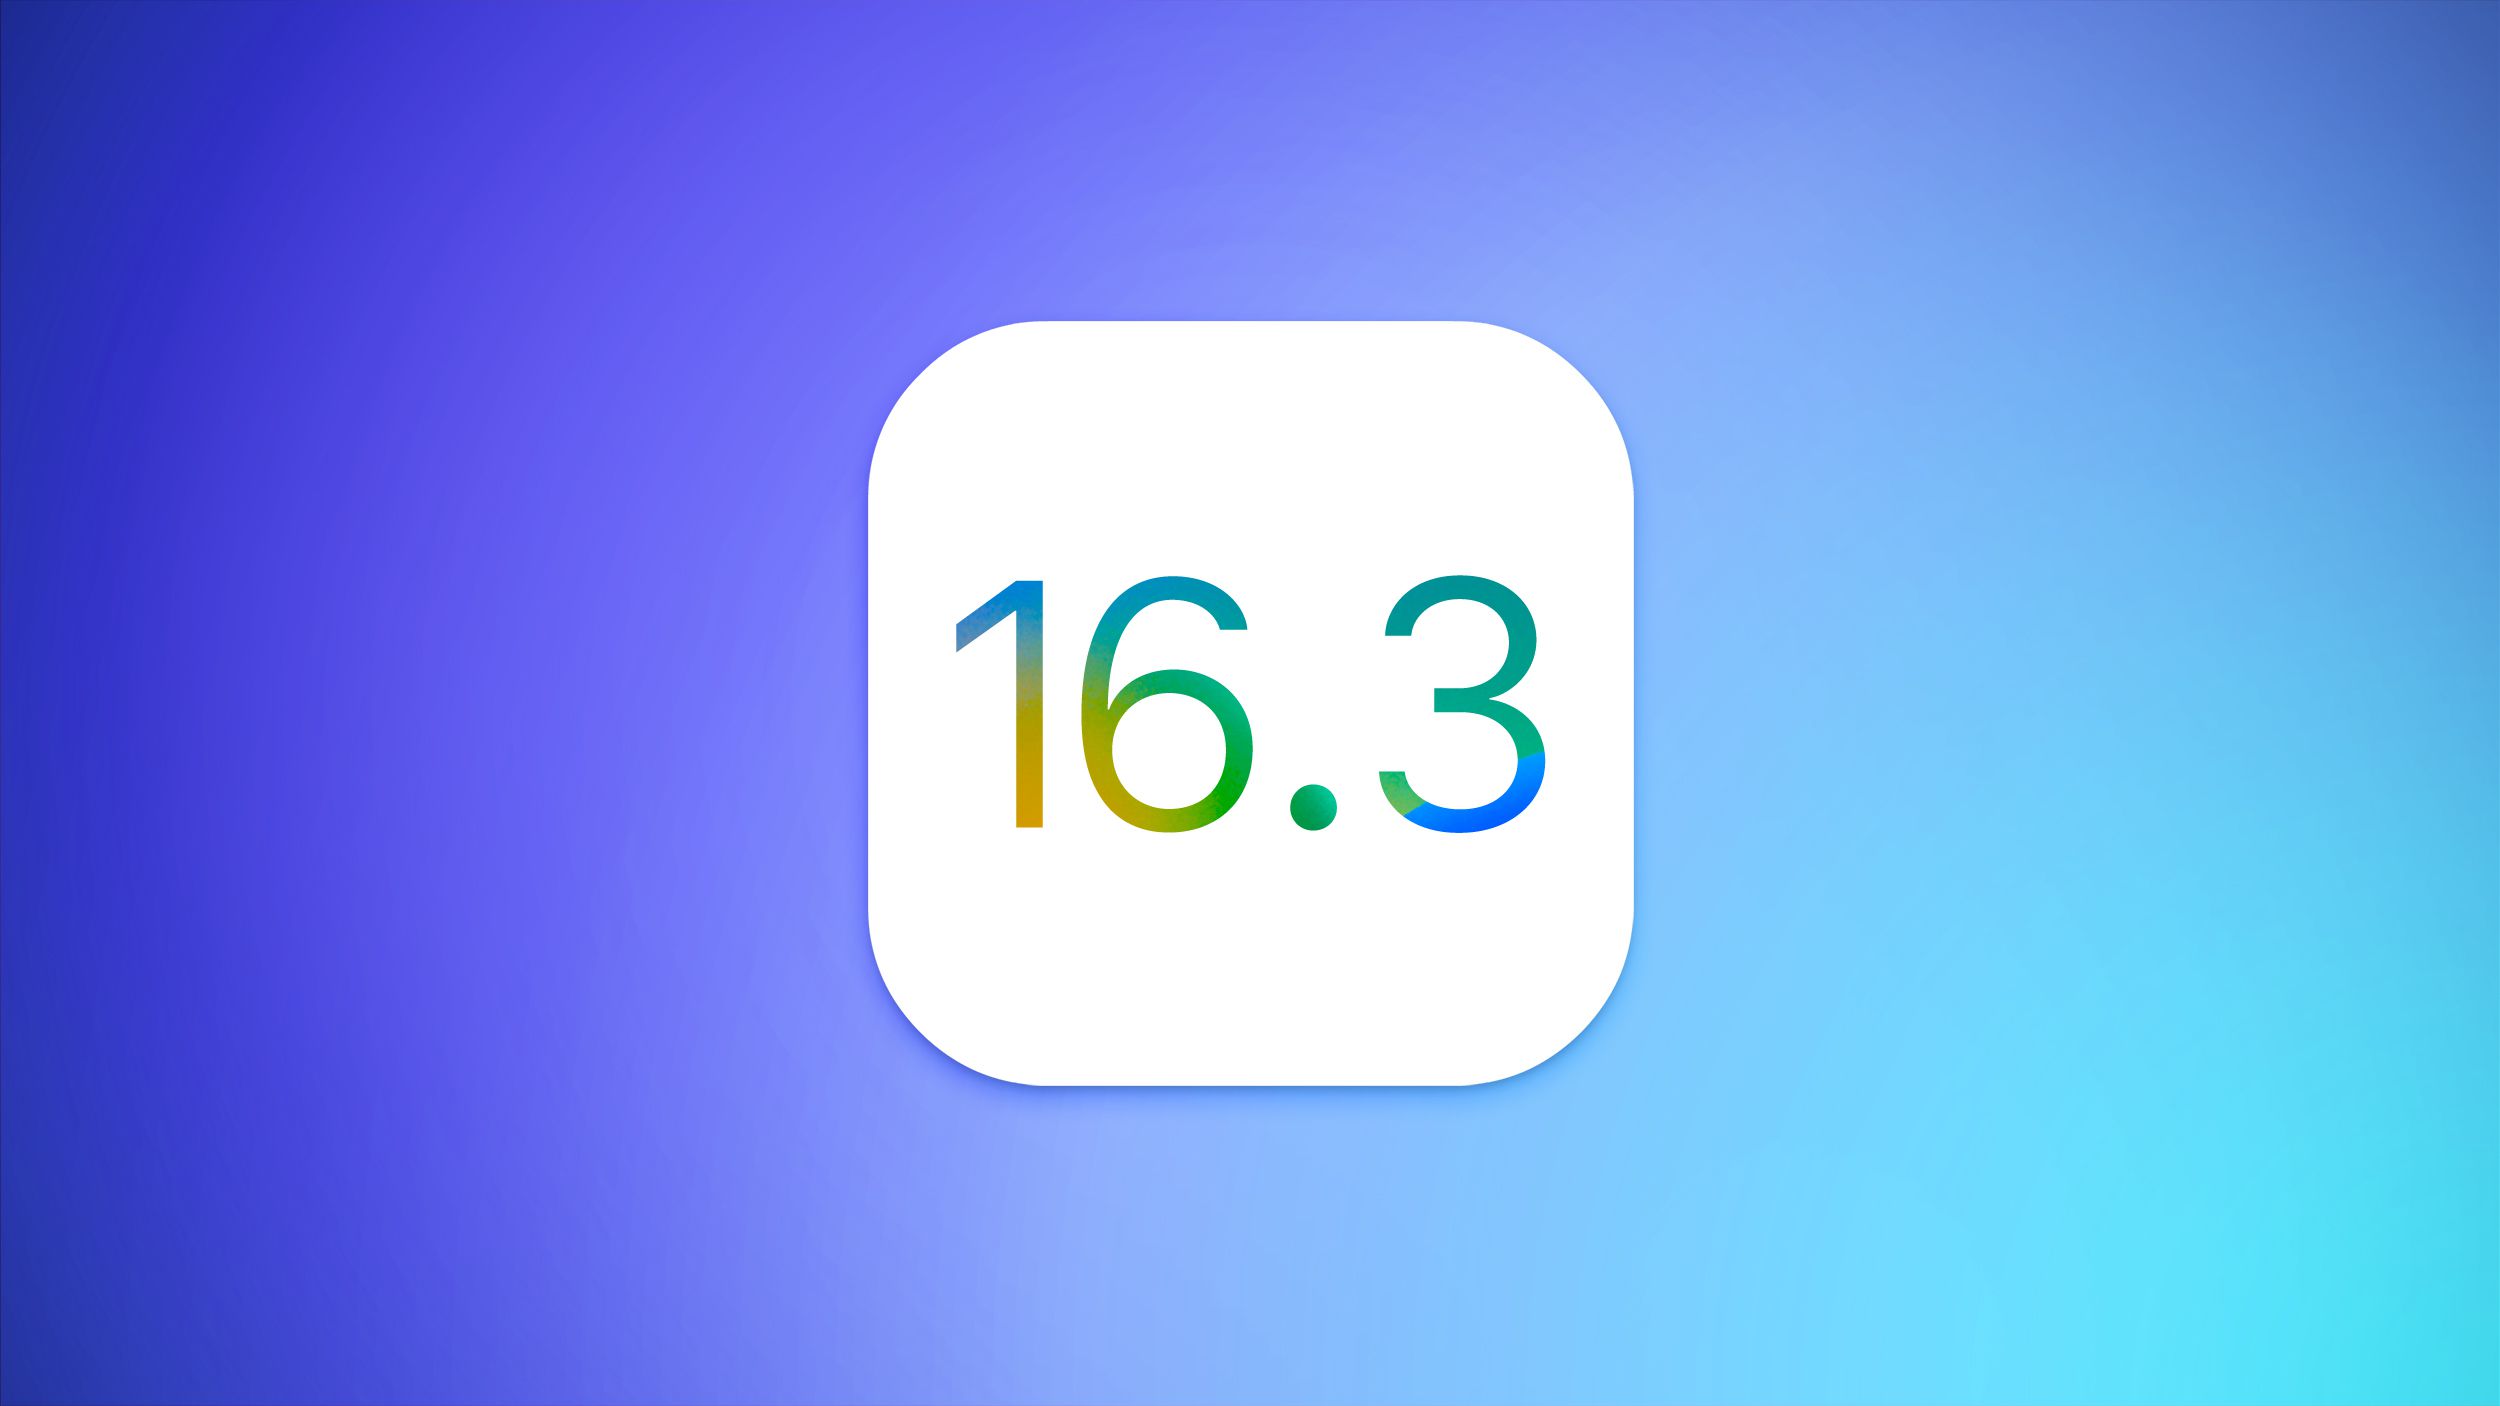 iOS 16.3 is coming next week: here’s what’s new